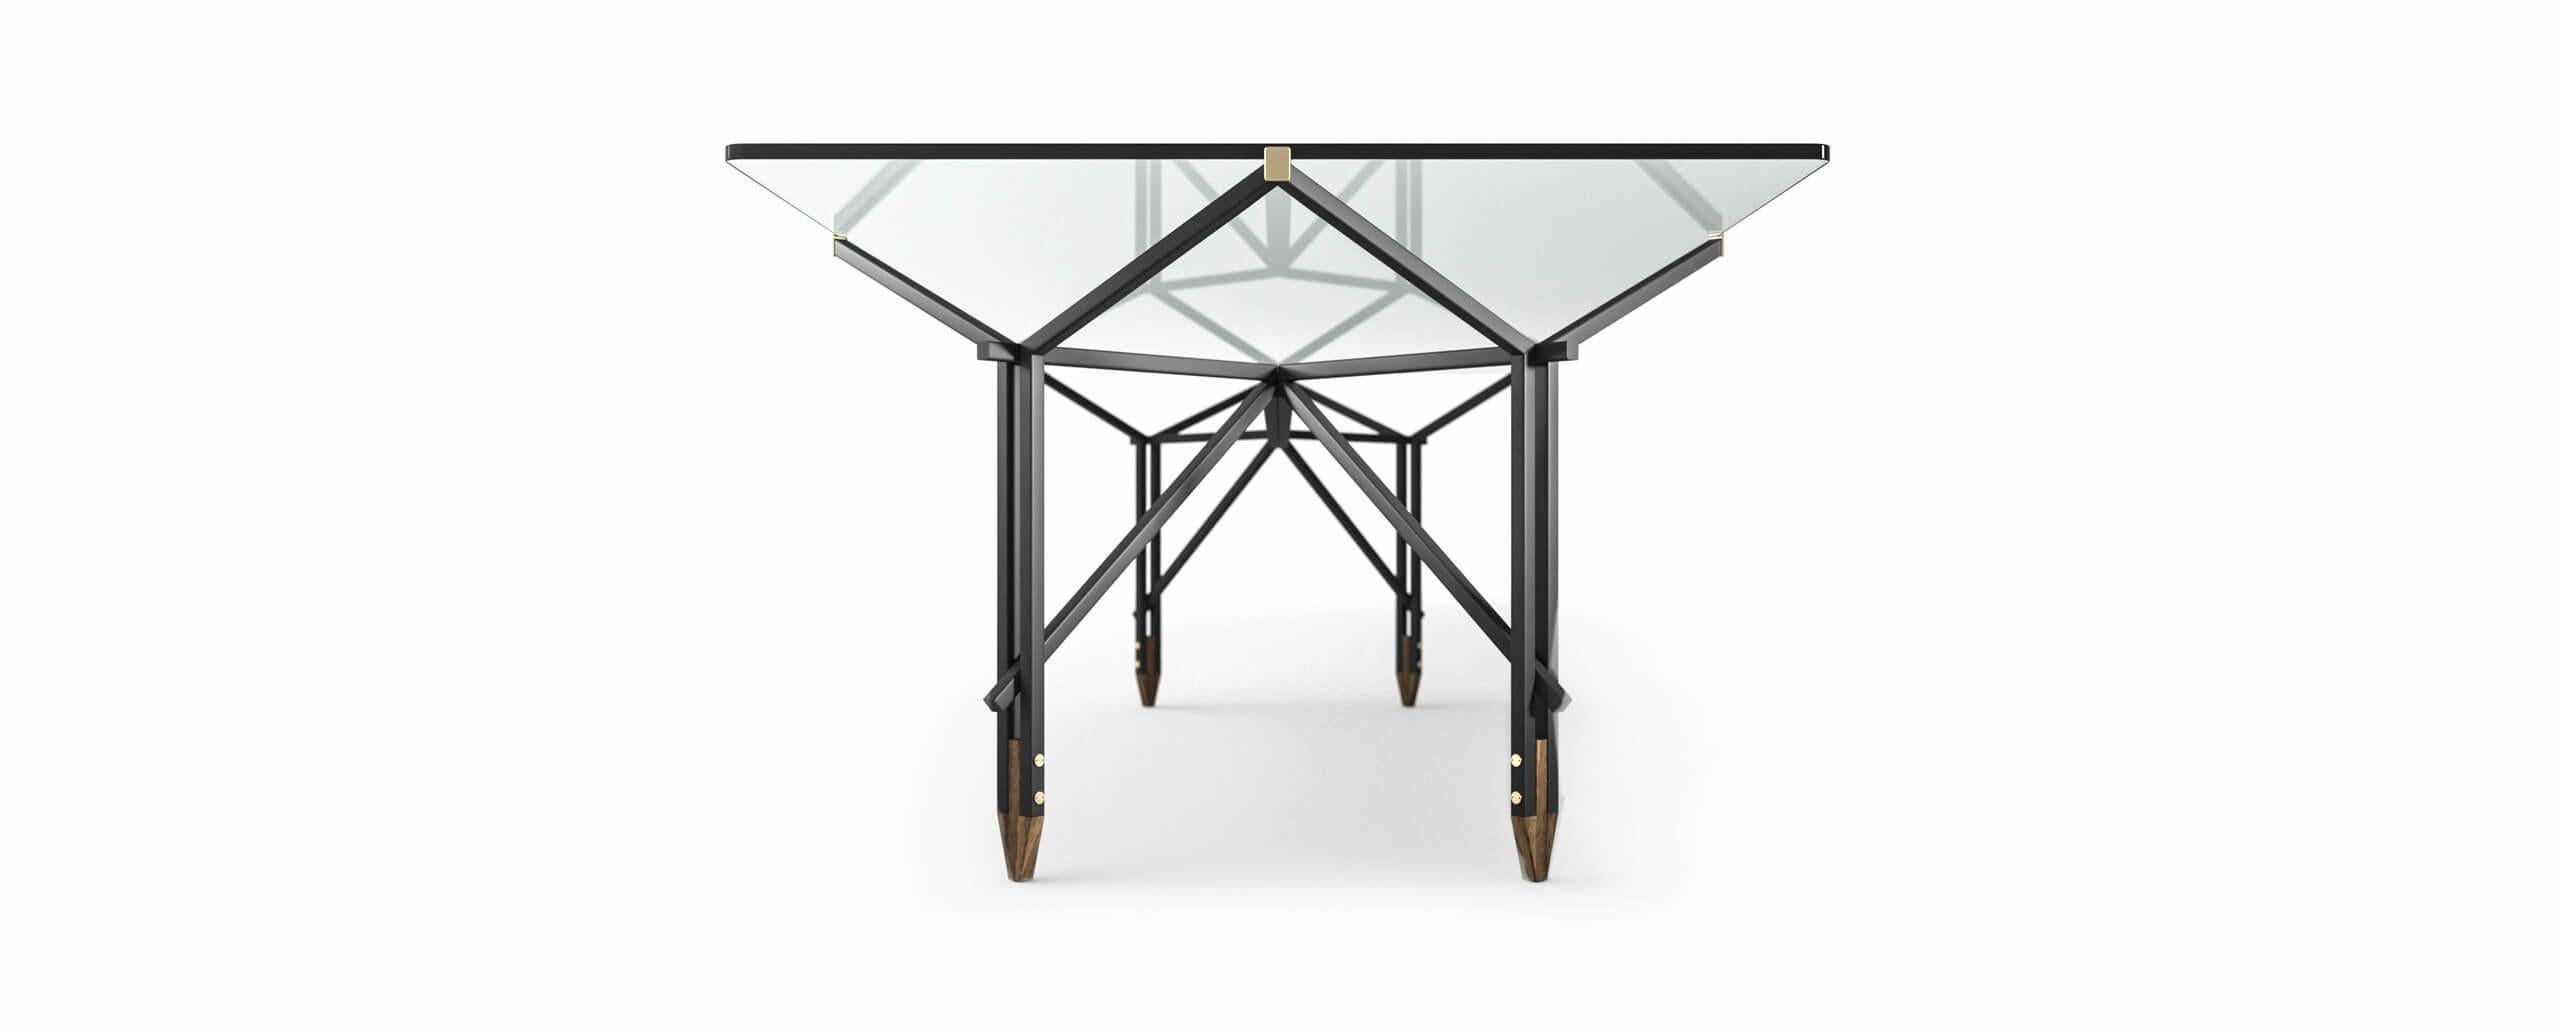 Table designed by Ico Parisi in 1955, relaunched in 2020.
Manufactured by Cassina in Italy.

Designed in 1955, the design of this table – a piece of furniture considered by Ico Parisi to be a central element in the home - accompanies the